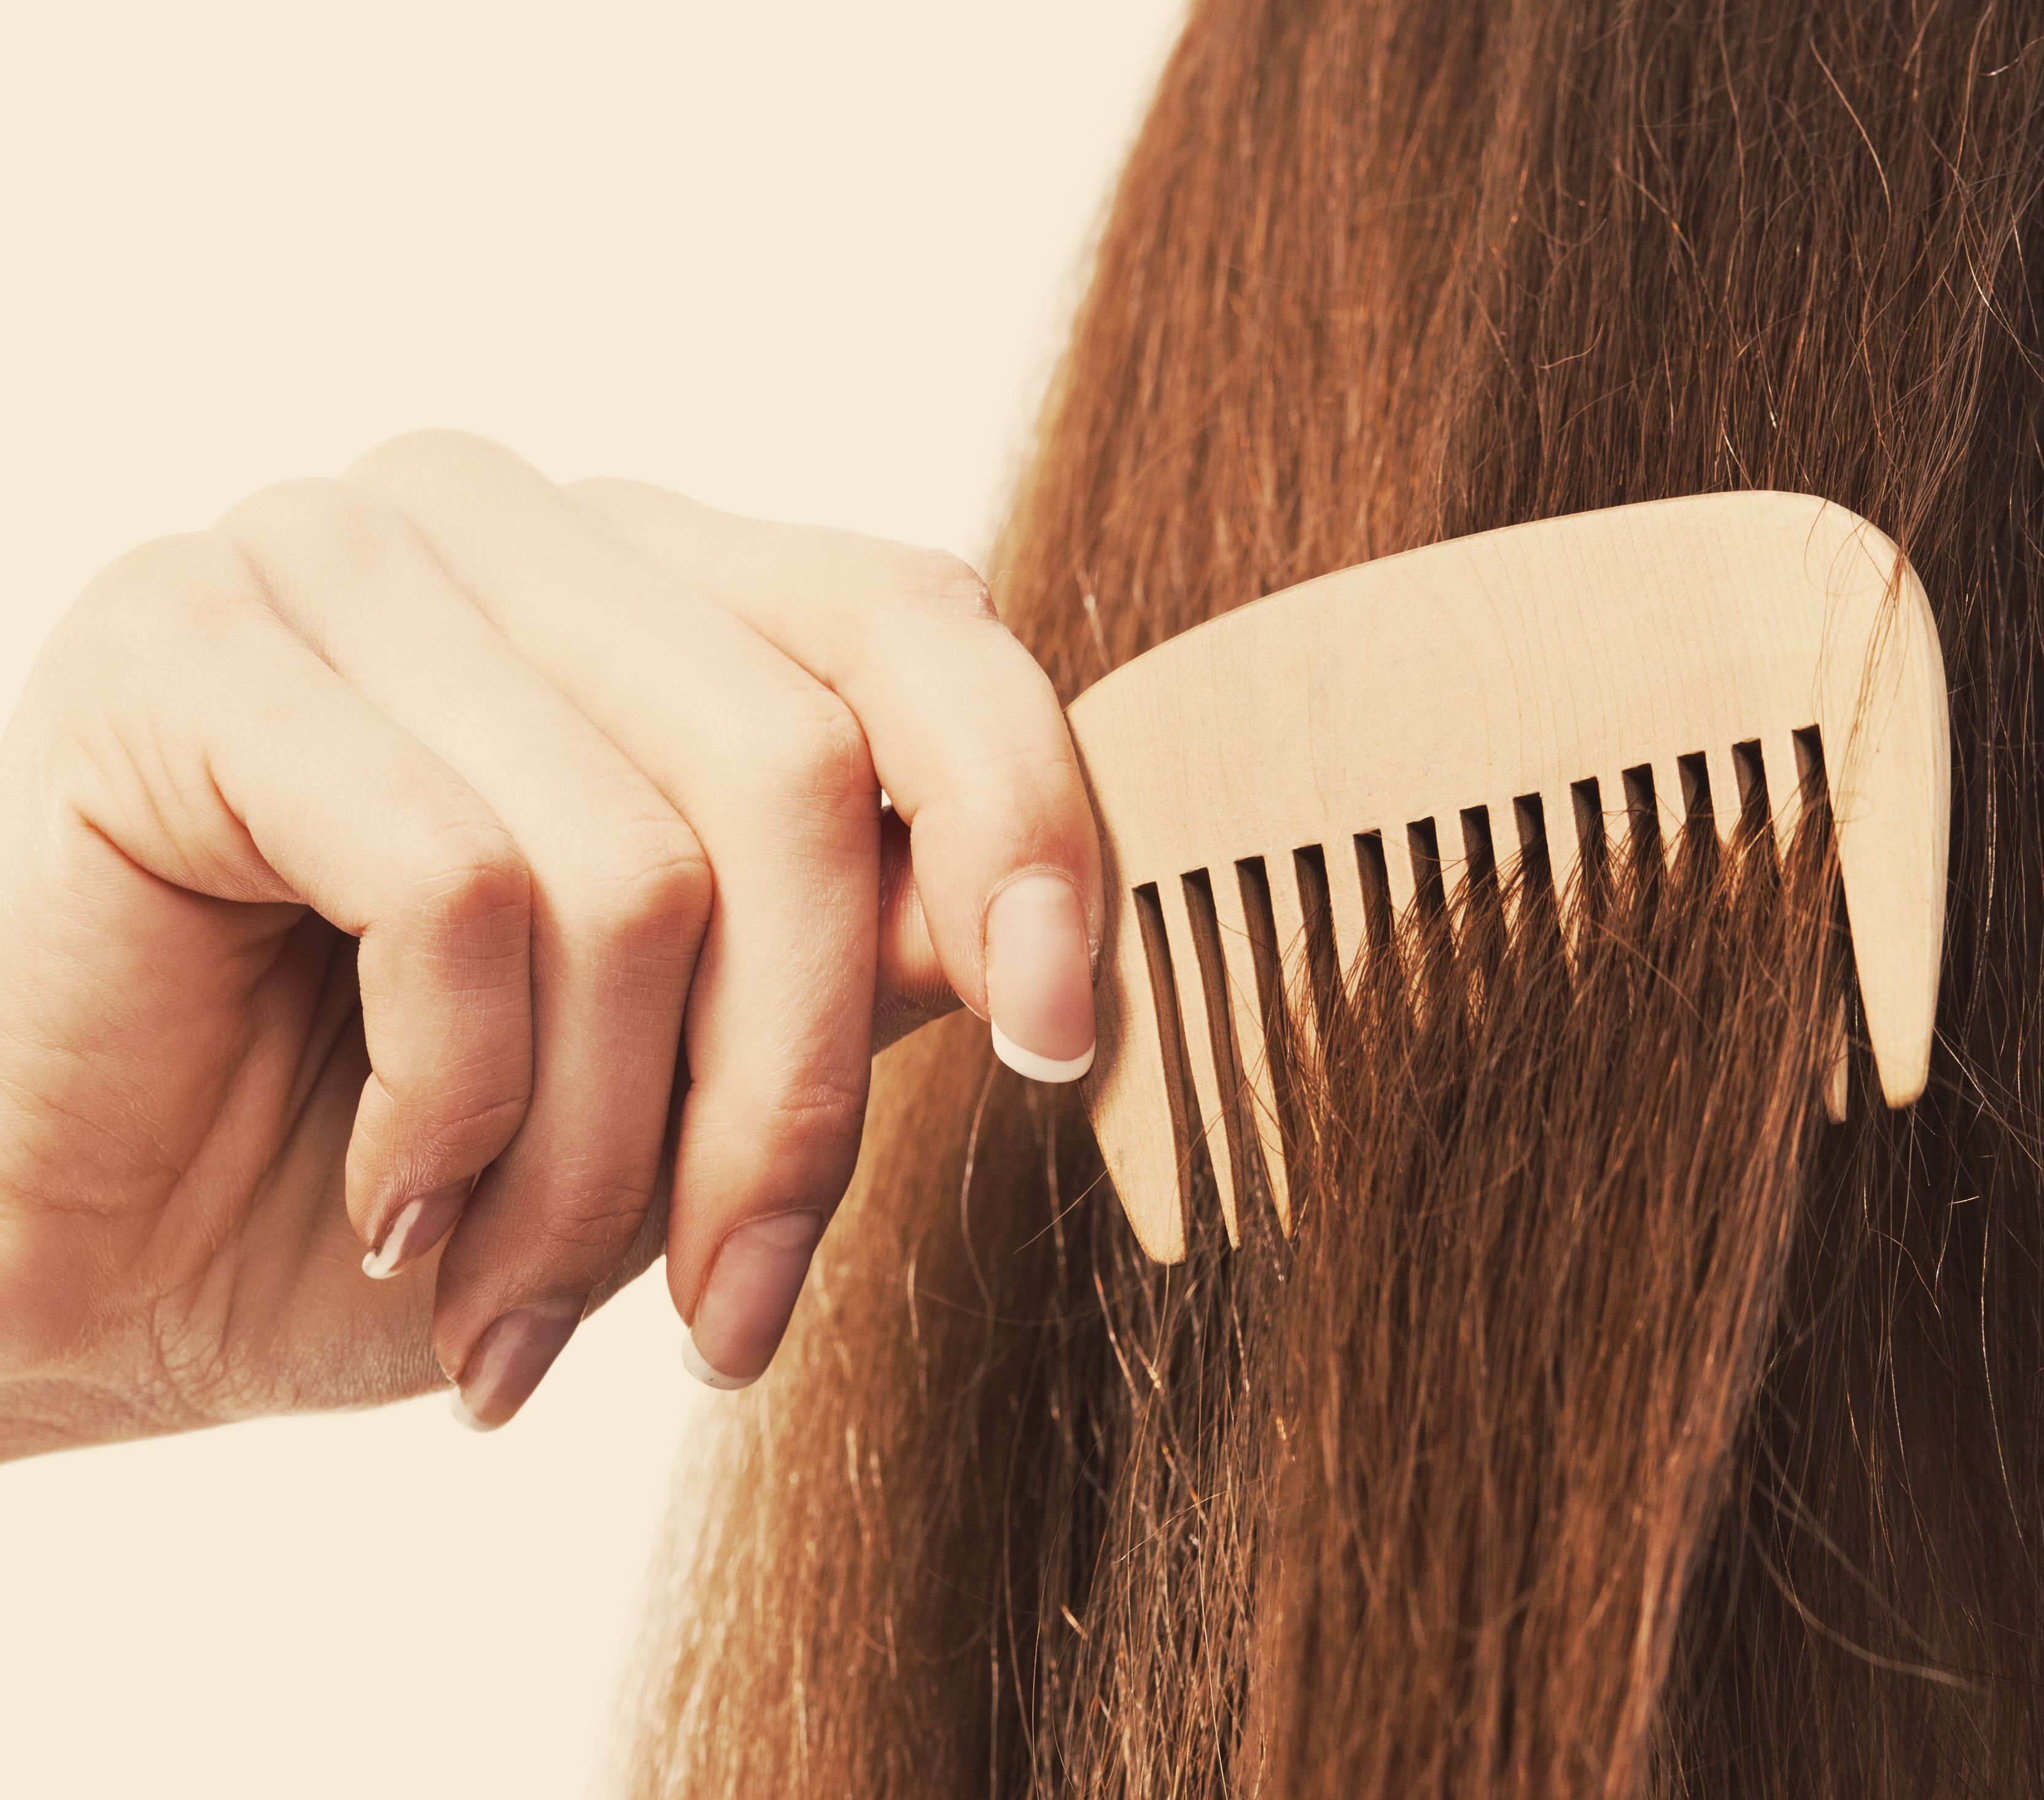 How to Thicken Your Hair: 11 Tips from Hair Care Experts